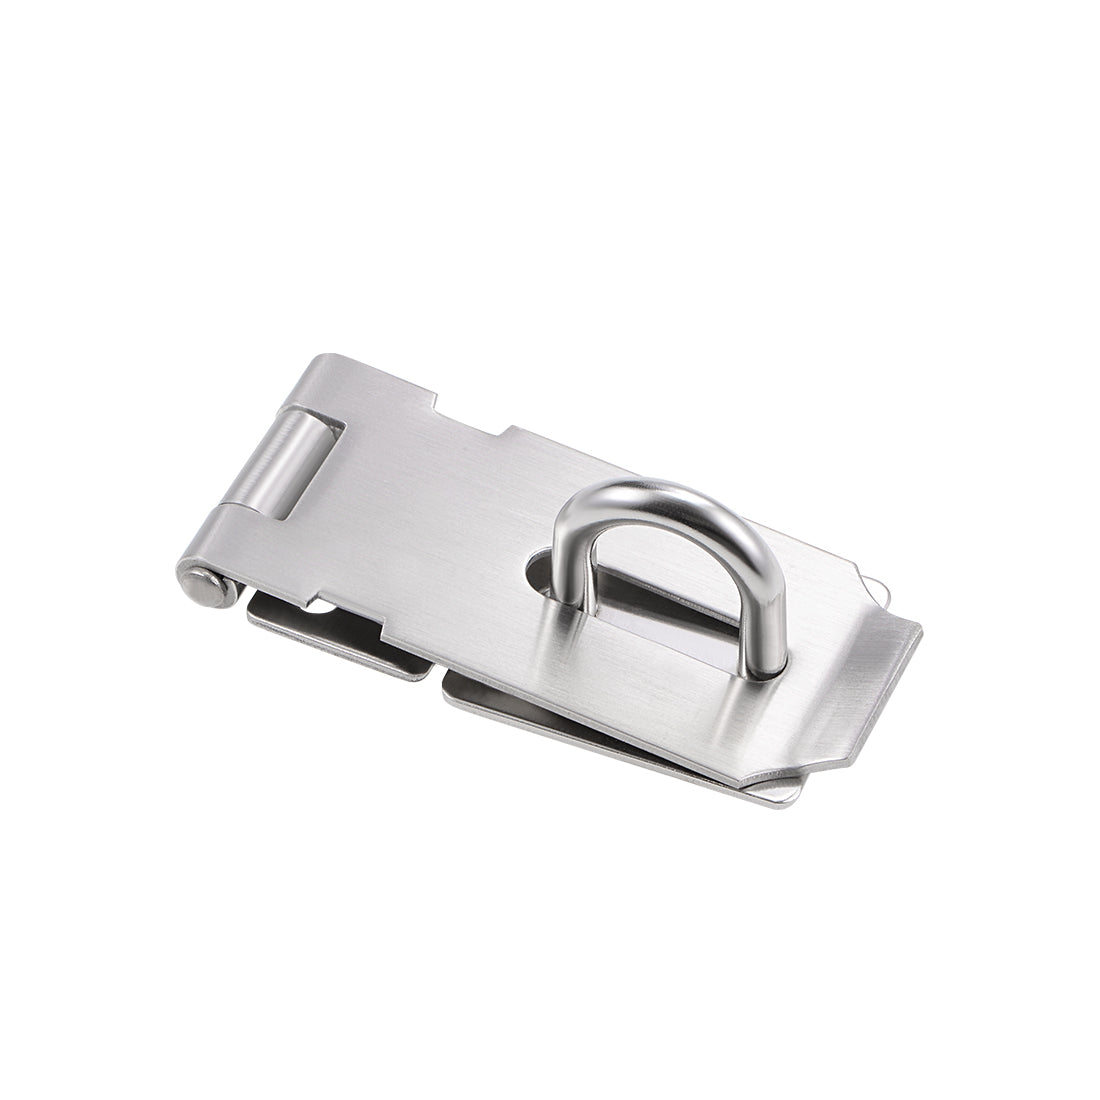 uxcell Uxcell Padlock Hasp Door Clasp Hasp Latch Security Safety Bolt Lock Latches 201 Stainless Steel